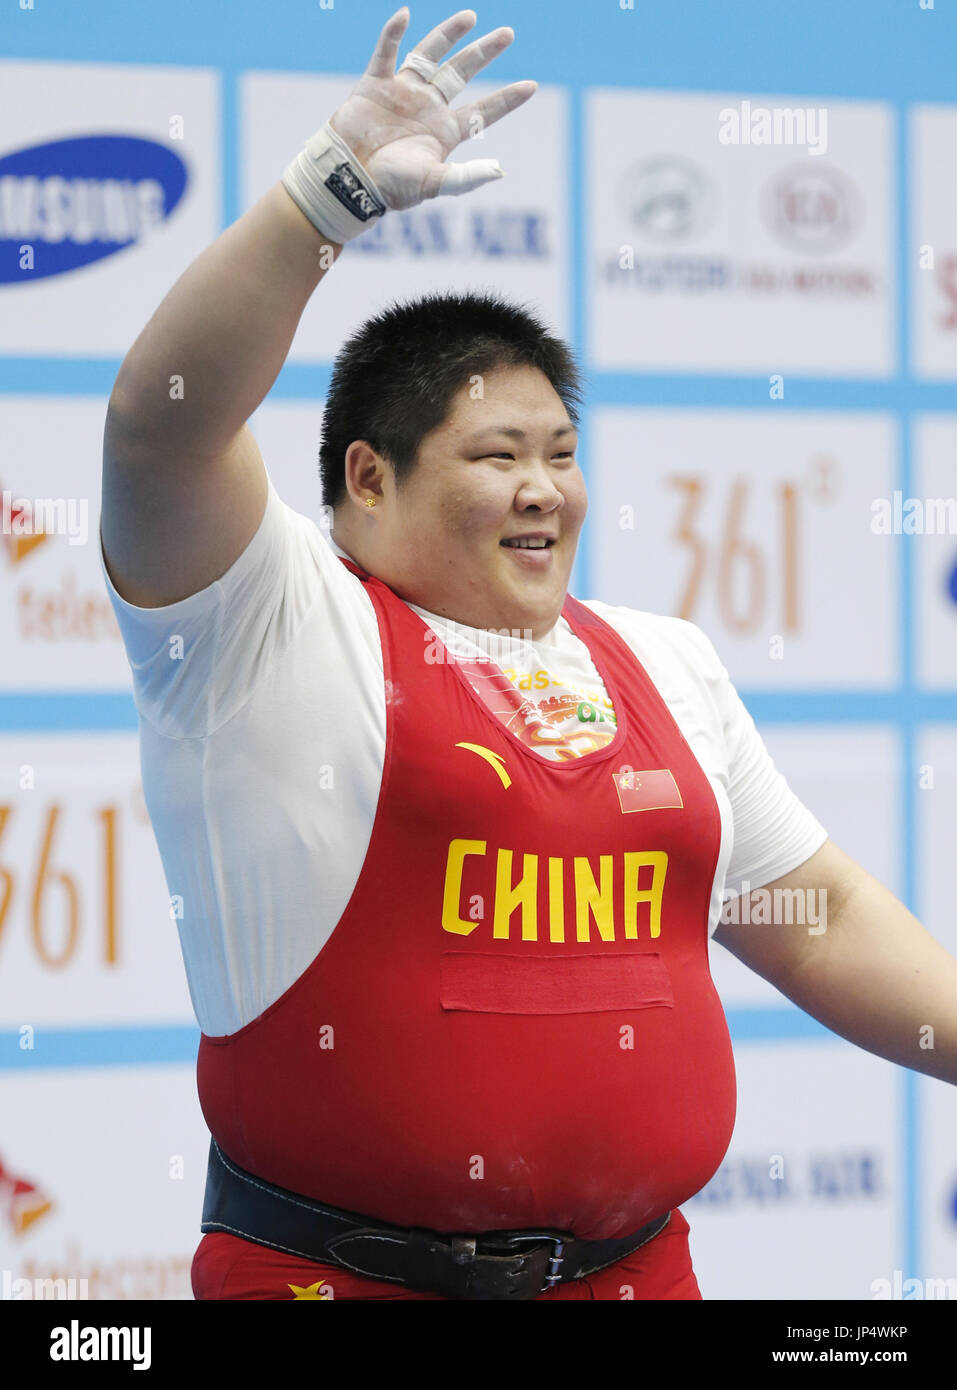 INCHEON, South Korea - Chinese weightlifter Zhou Lulu acknowledges  spectators after lifting 192 kilograms to set a world record in the women's  over-75kg class at the Asian Games in Incheon, South Korea,